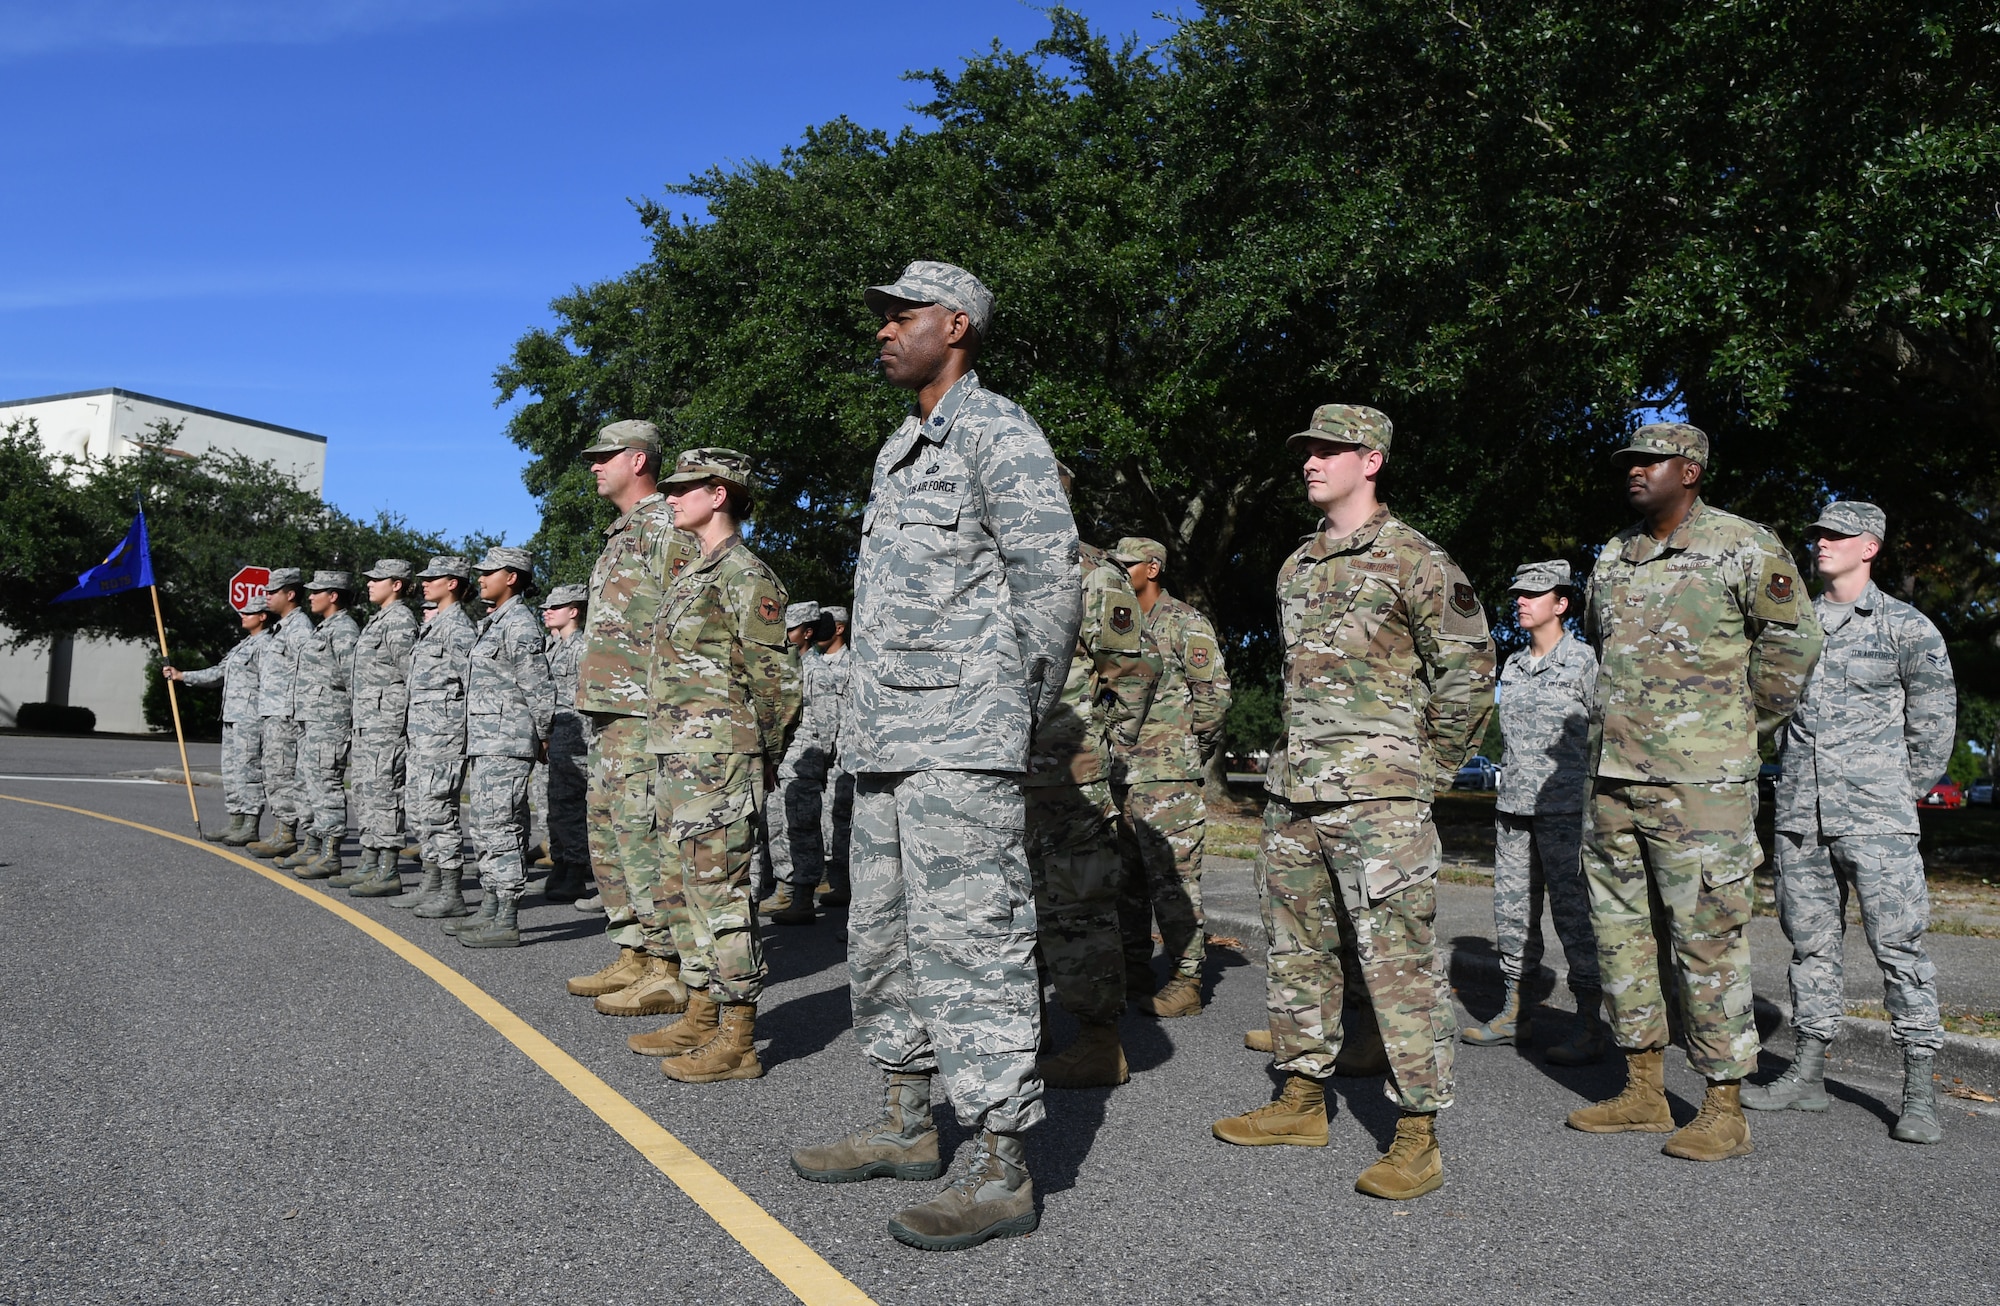 Keesler Airmen stand in formation during the POW/MIA retreat ceremony at Keesler Air Force Base, Mississippi, Sept. 20, 2019. The event was held to raise awareness and to pay tribute to all prisoners of war and those military members still missing in action. (U.S. Air Force photo by Kemberly Groue)